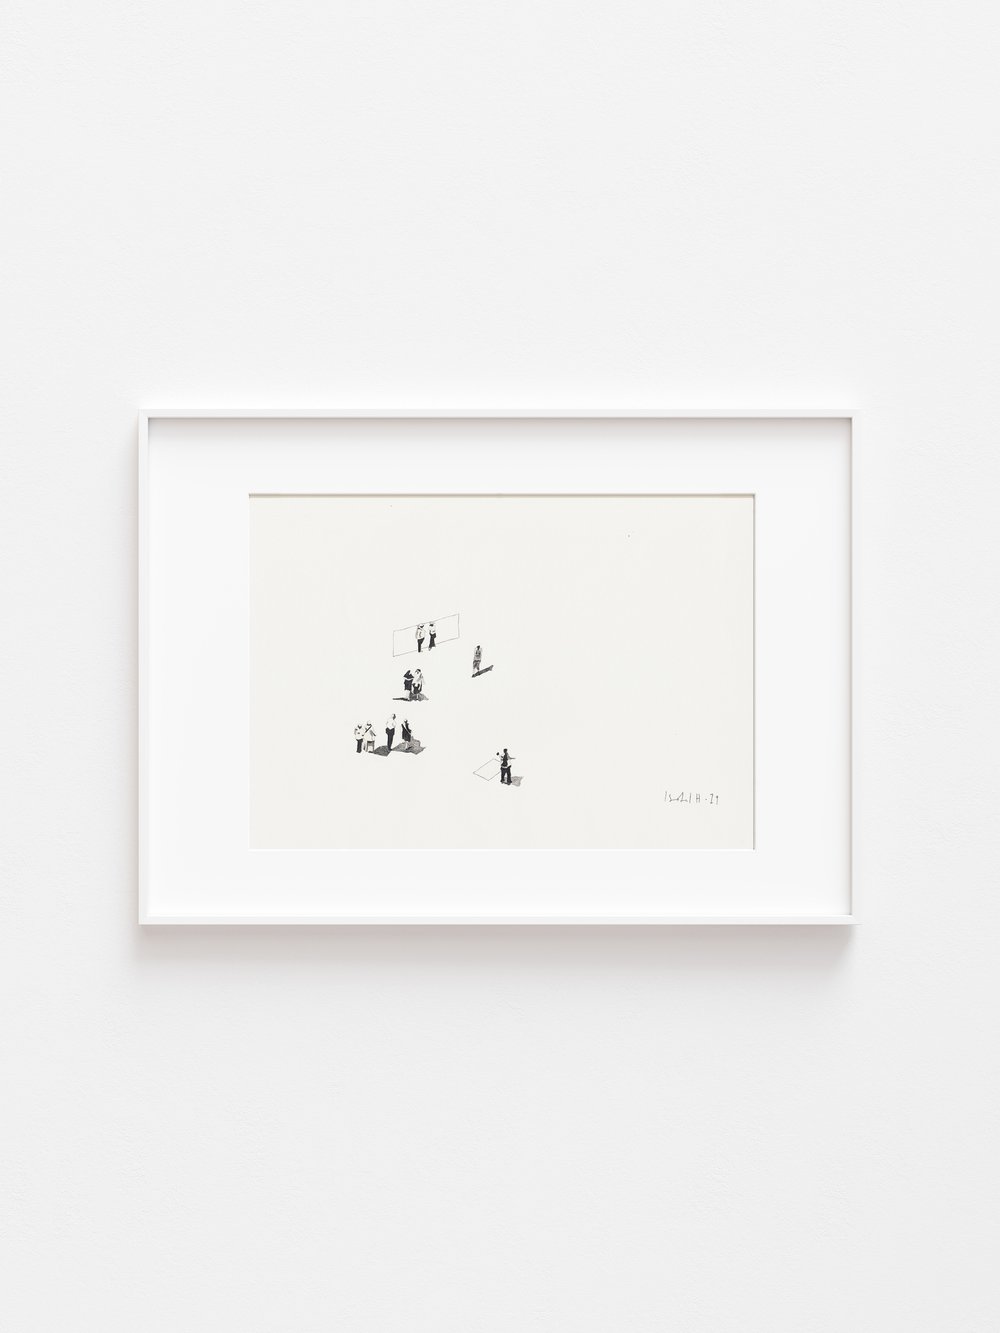 Pencil and watercolour drawing artwork by artist, Isobel Hill of a crowd on off-white paper, image in white frame mockup